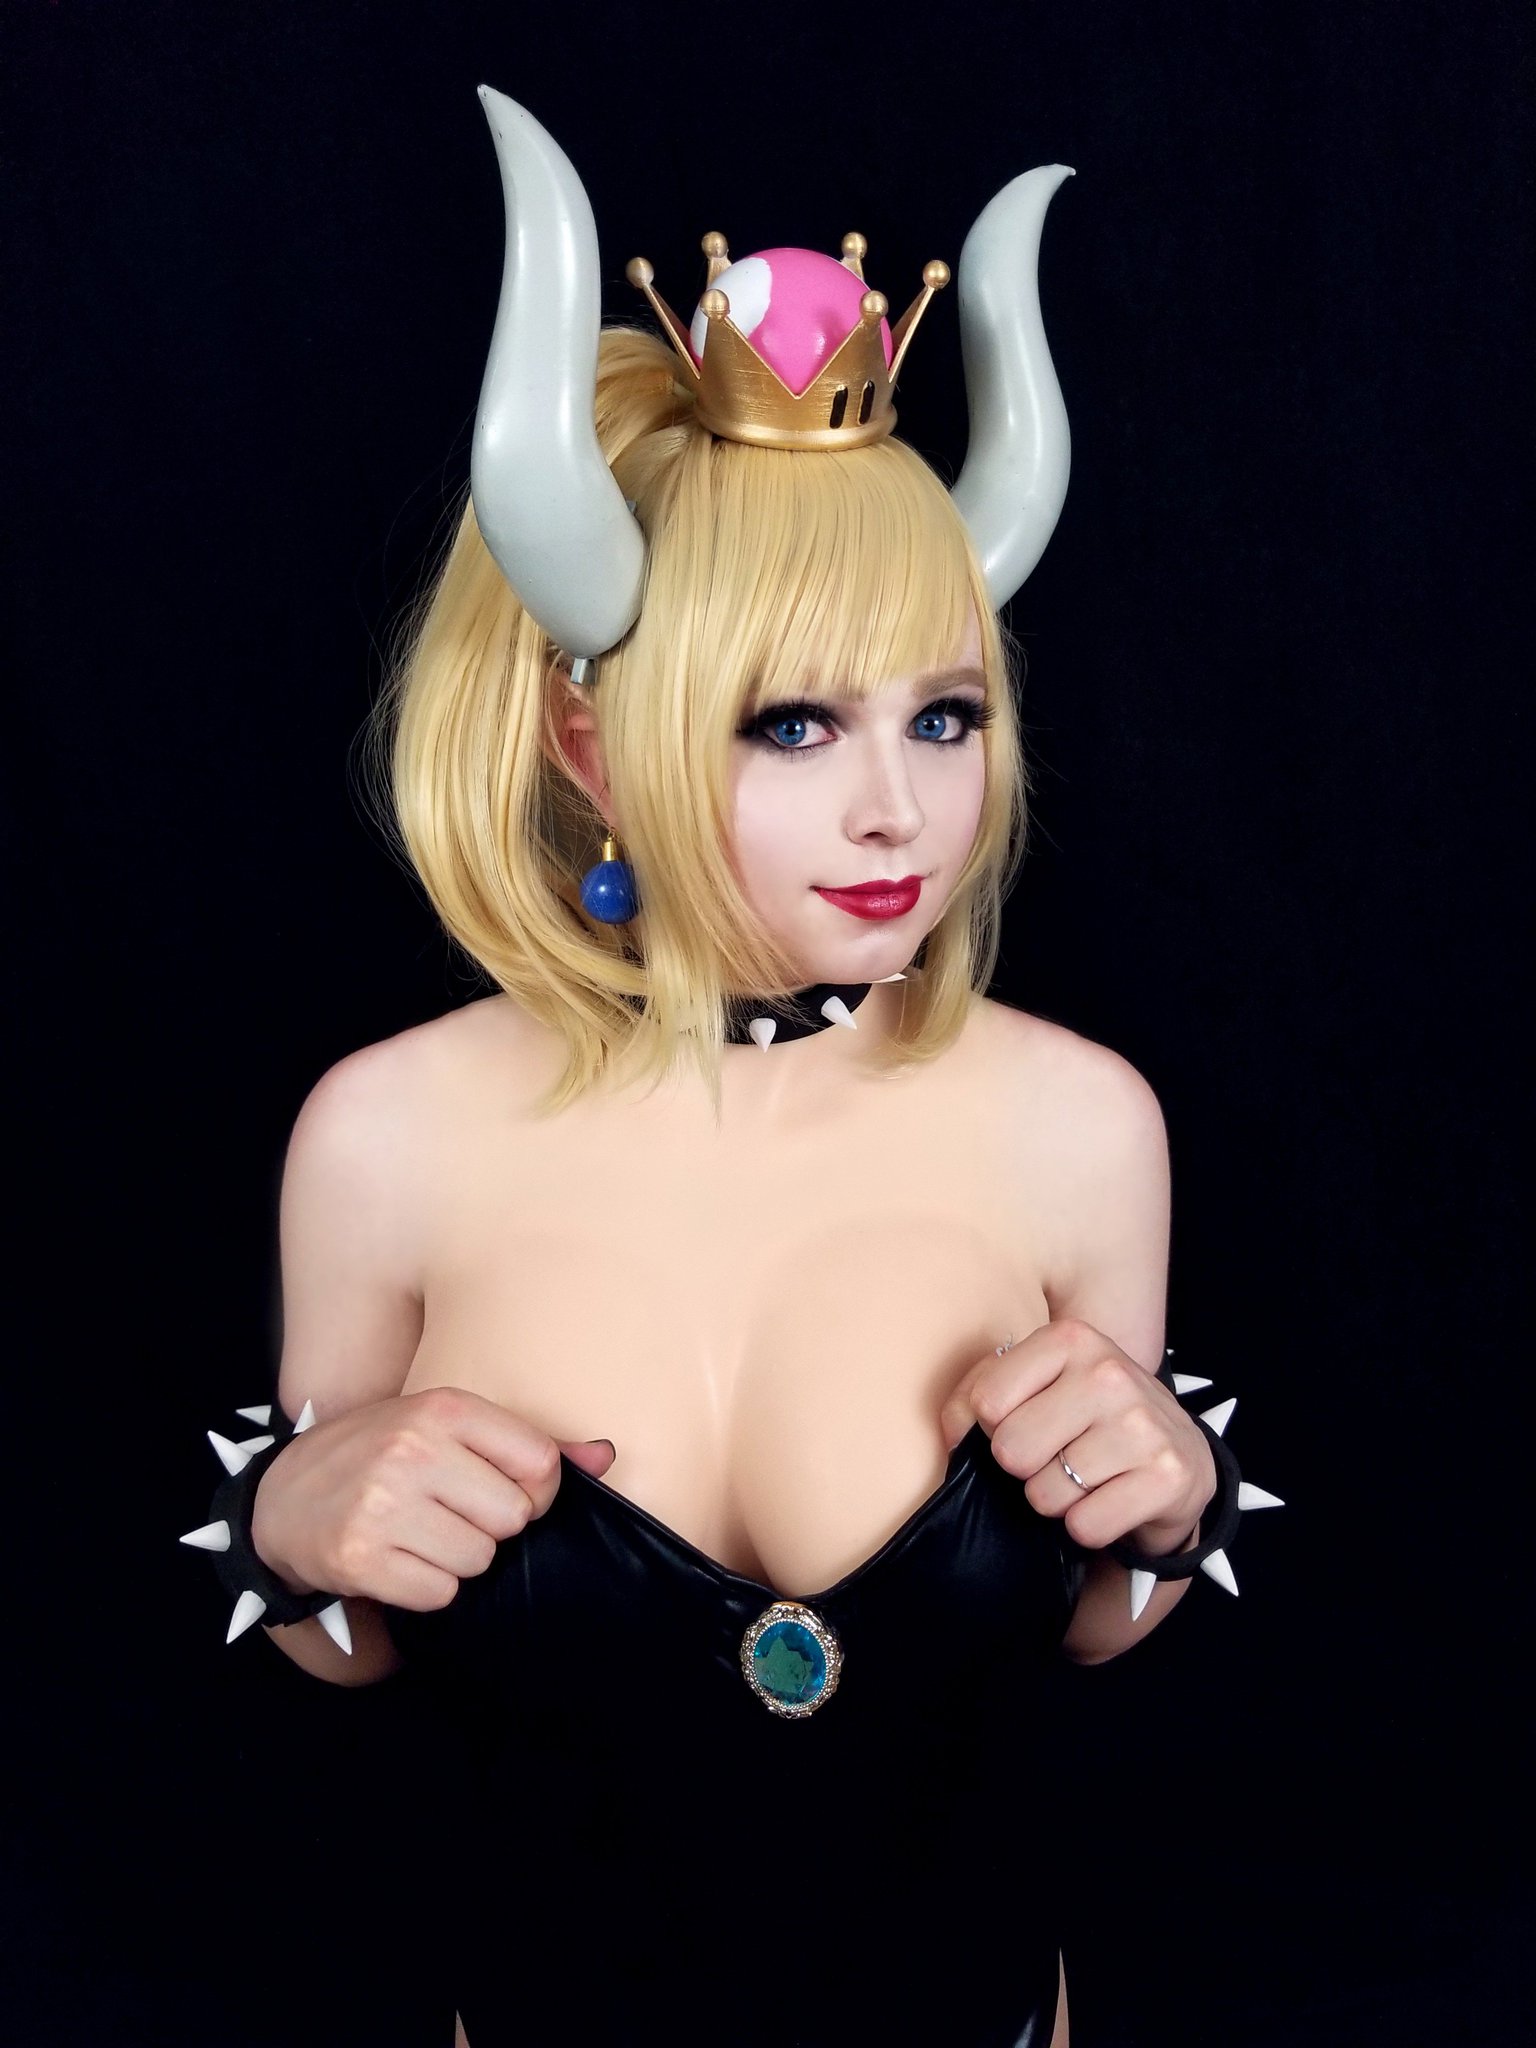 sneaky cosplay bowsette c9 scuderi zach peach cosplays cloud props makeup caption meme instagram profile imgflip extra cosplayer